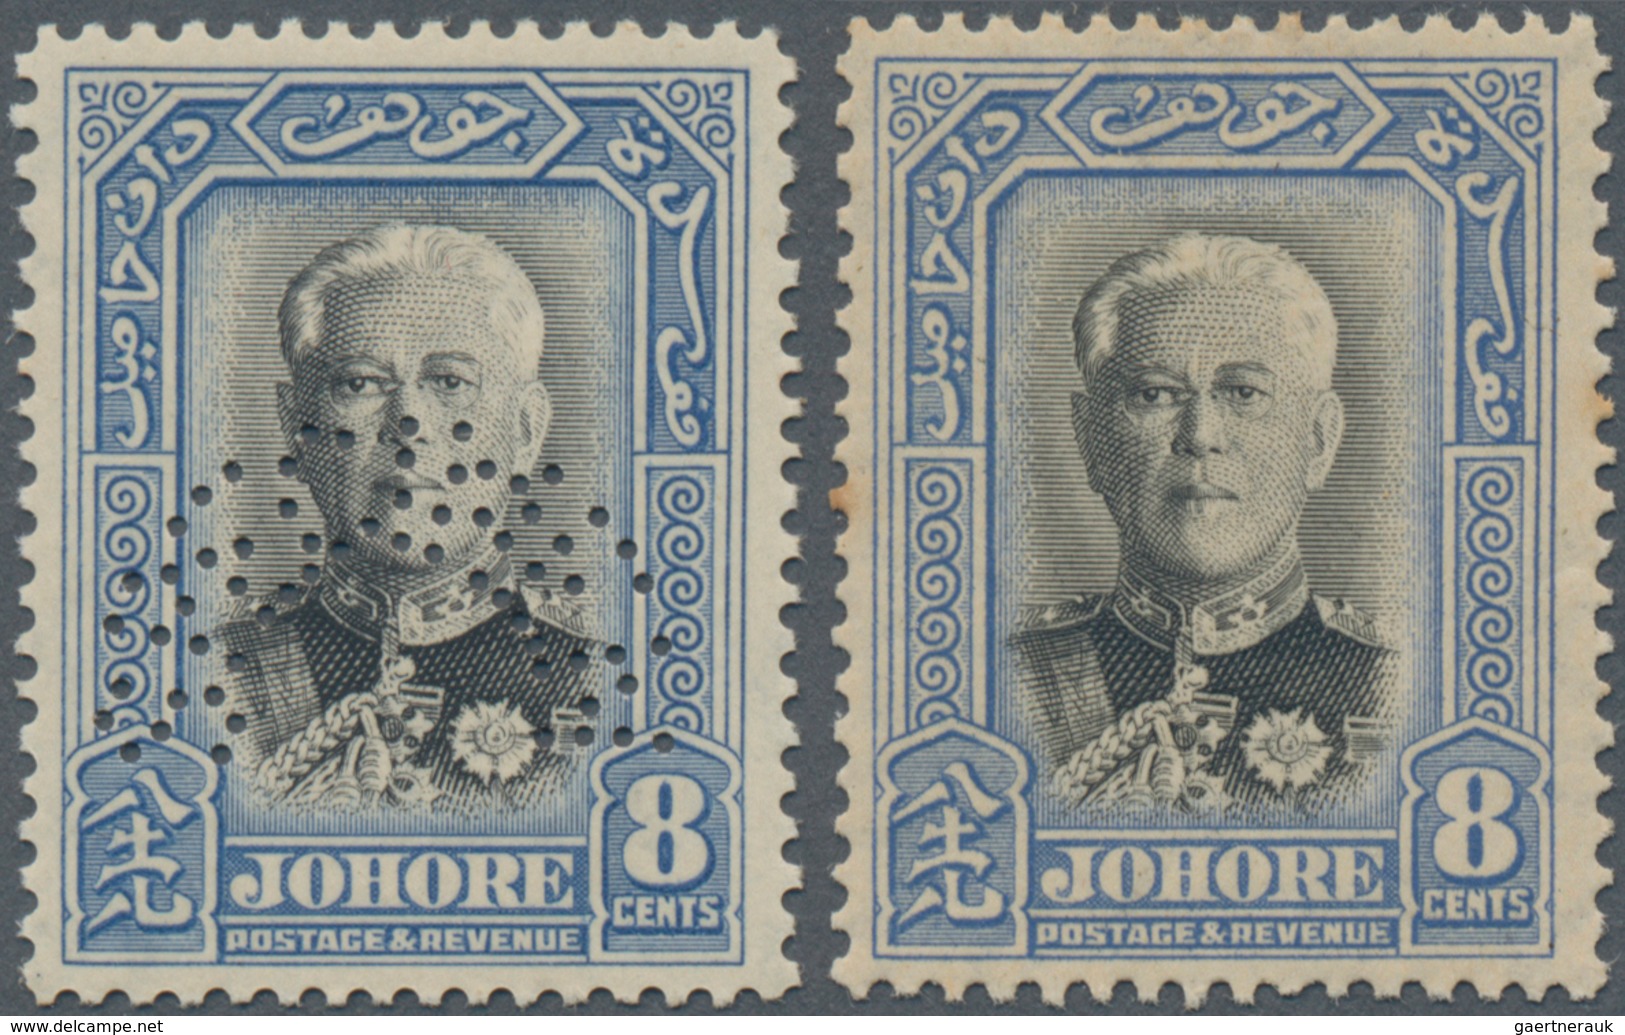 Malaiische Staaten - Johor: 1940 'Sultan Sir Ibrahim' Commemorative Issue: Two Mint Stamps, One Perf - Johore